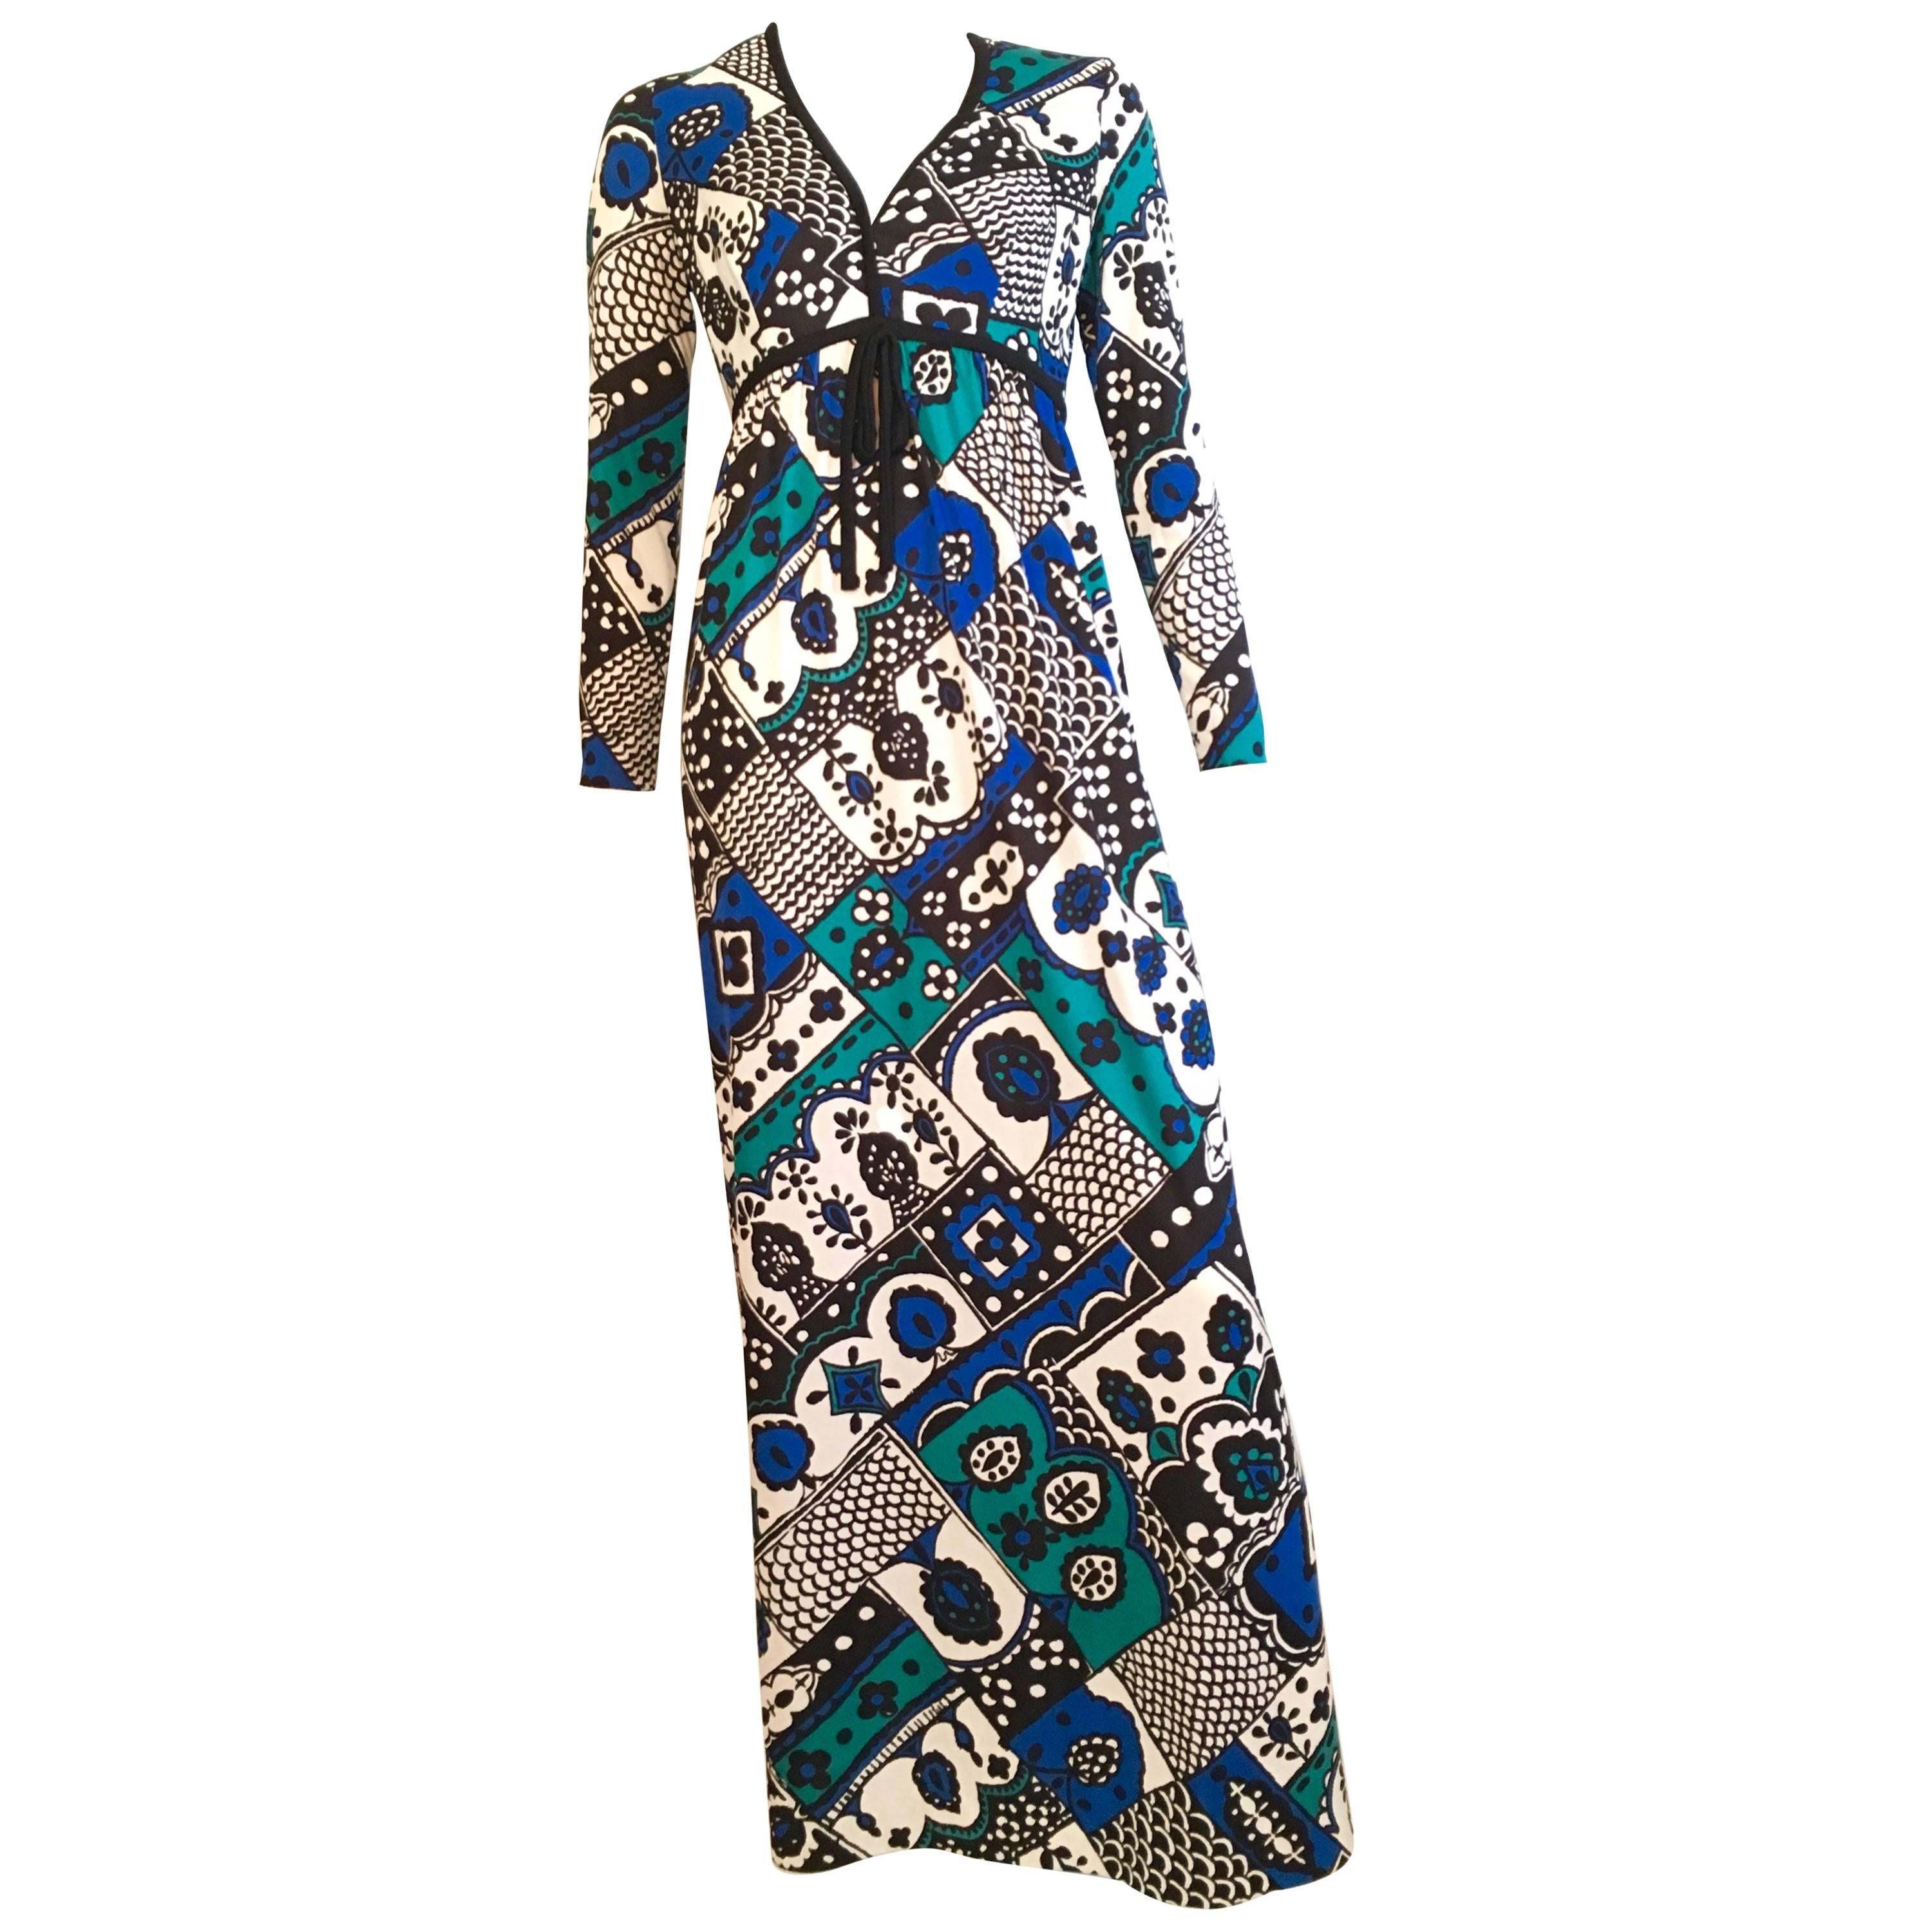 Young Dimensions for Saks Fifth Avenue MOD Maxi Dress Size 4. For Sale